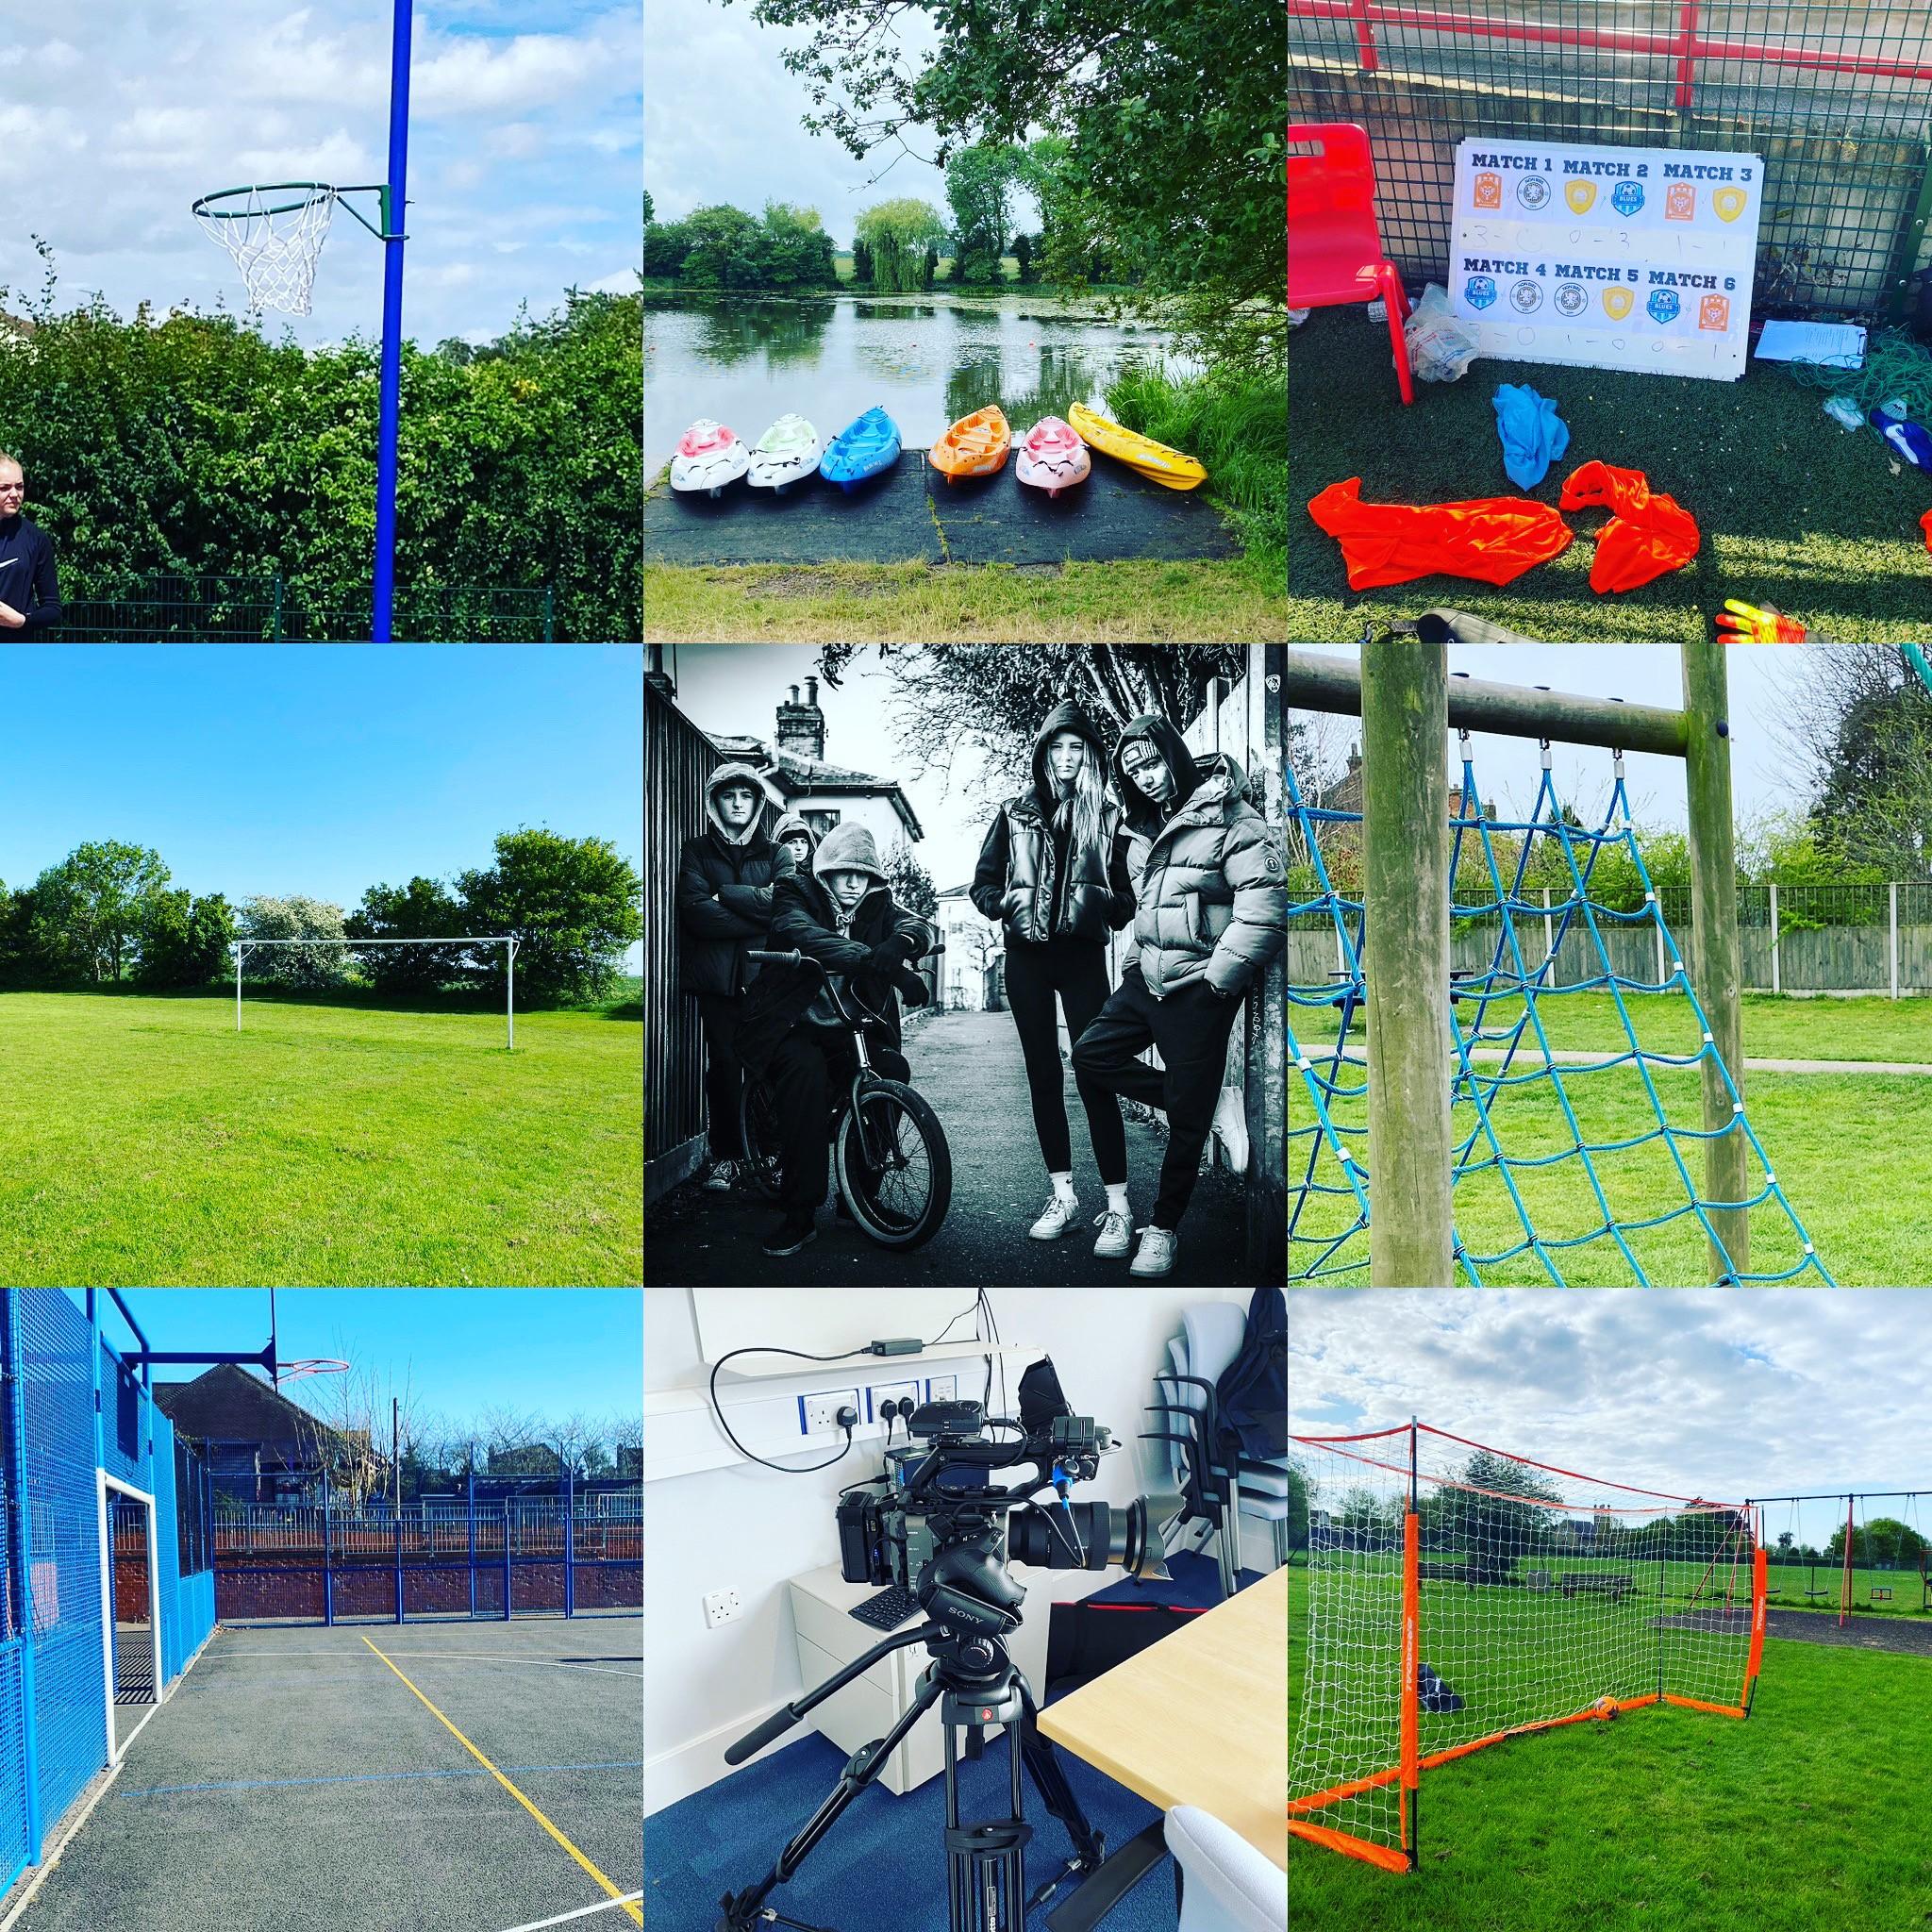 Collage showing various youth activities, including football goals, kayaks, basketball hoops and obstacle courses. In the centre is a group of teenagers in black and white, staring threateningly at the camera